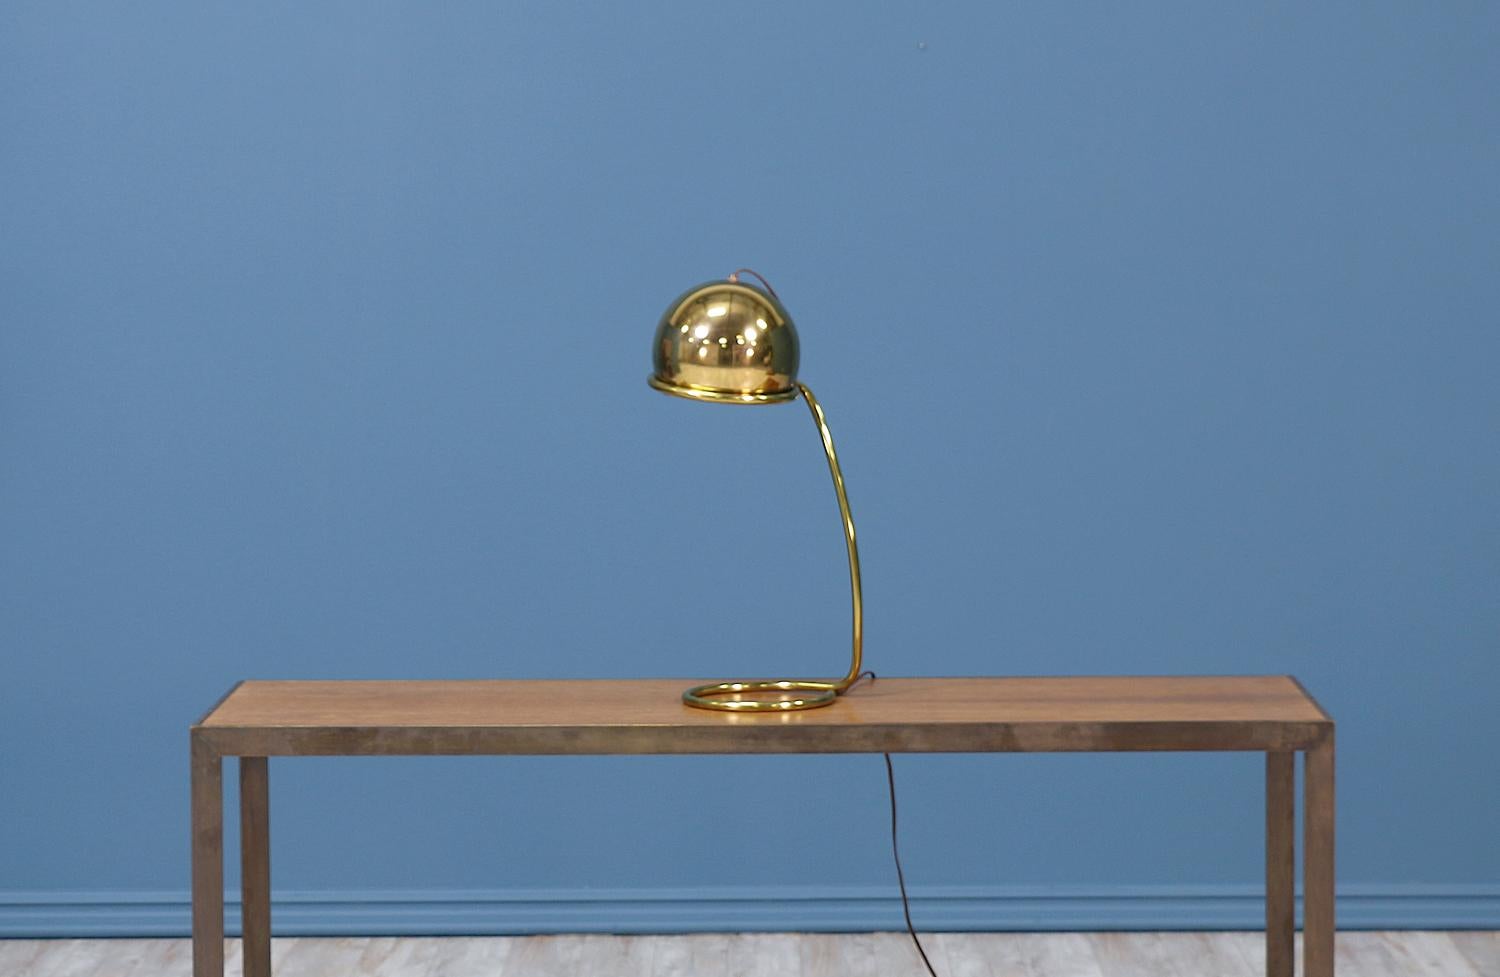 Midcentury desk lamp designed and manufactured circa 1960s in the United States. A mixture of coiled and curved lines support the geometric dome shade. This brass beauty has been re-polished and displays an age appropriate patina.

ID number: